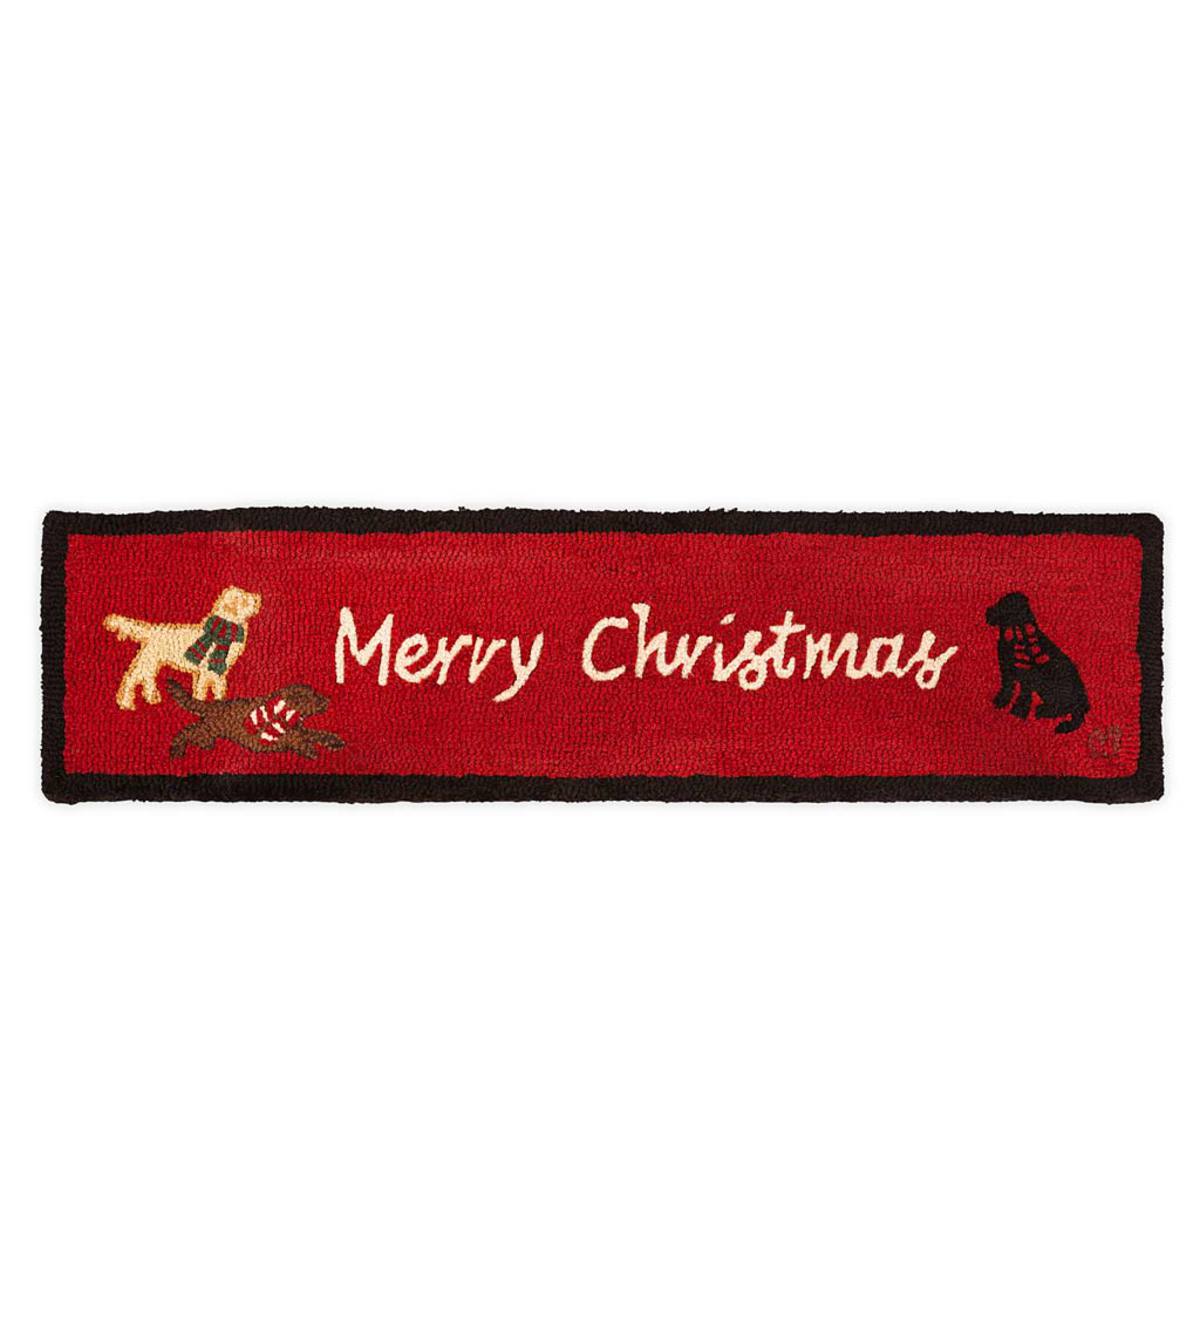 Hooked Wool Merry Christmas Labs Hearth Runner - Red